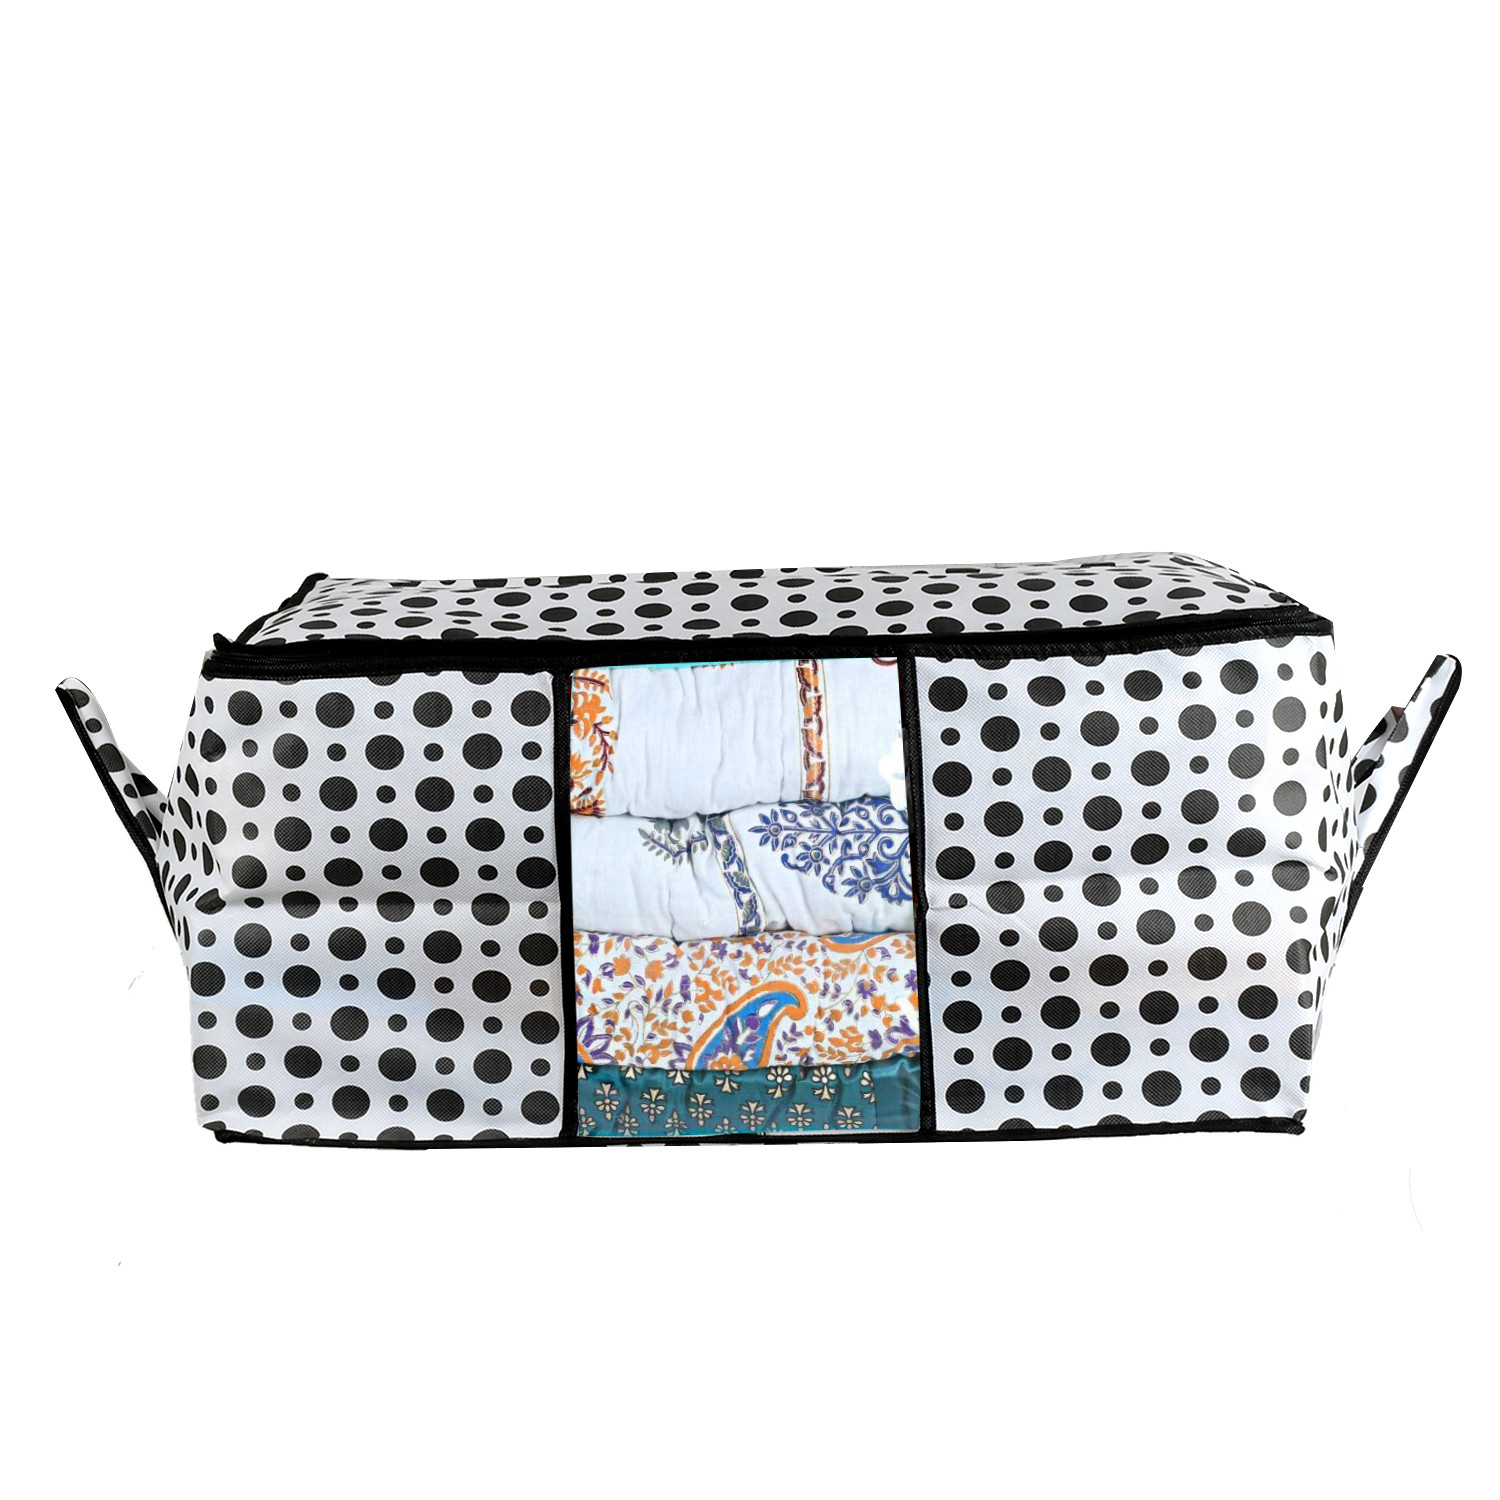 Kuber Industries Polka Dots Design Non Woven Underbed Storage Bag,Cloth Organiser,Blanket Cover with Transparent Window (Black & White) -CTKTC38101